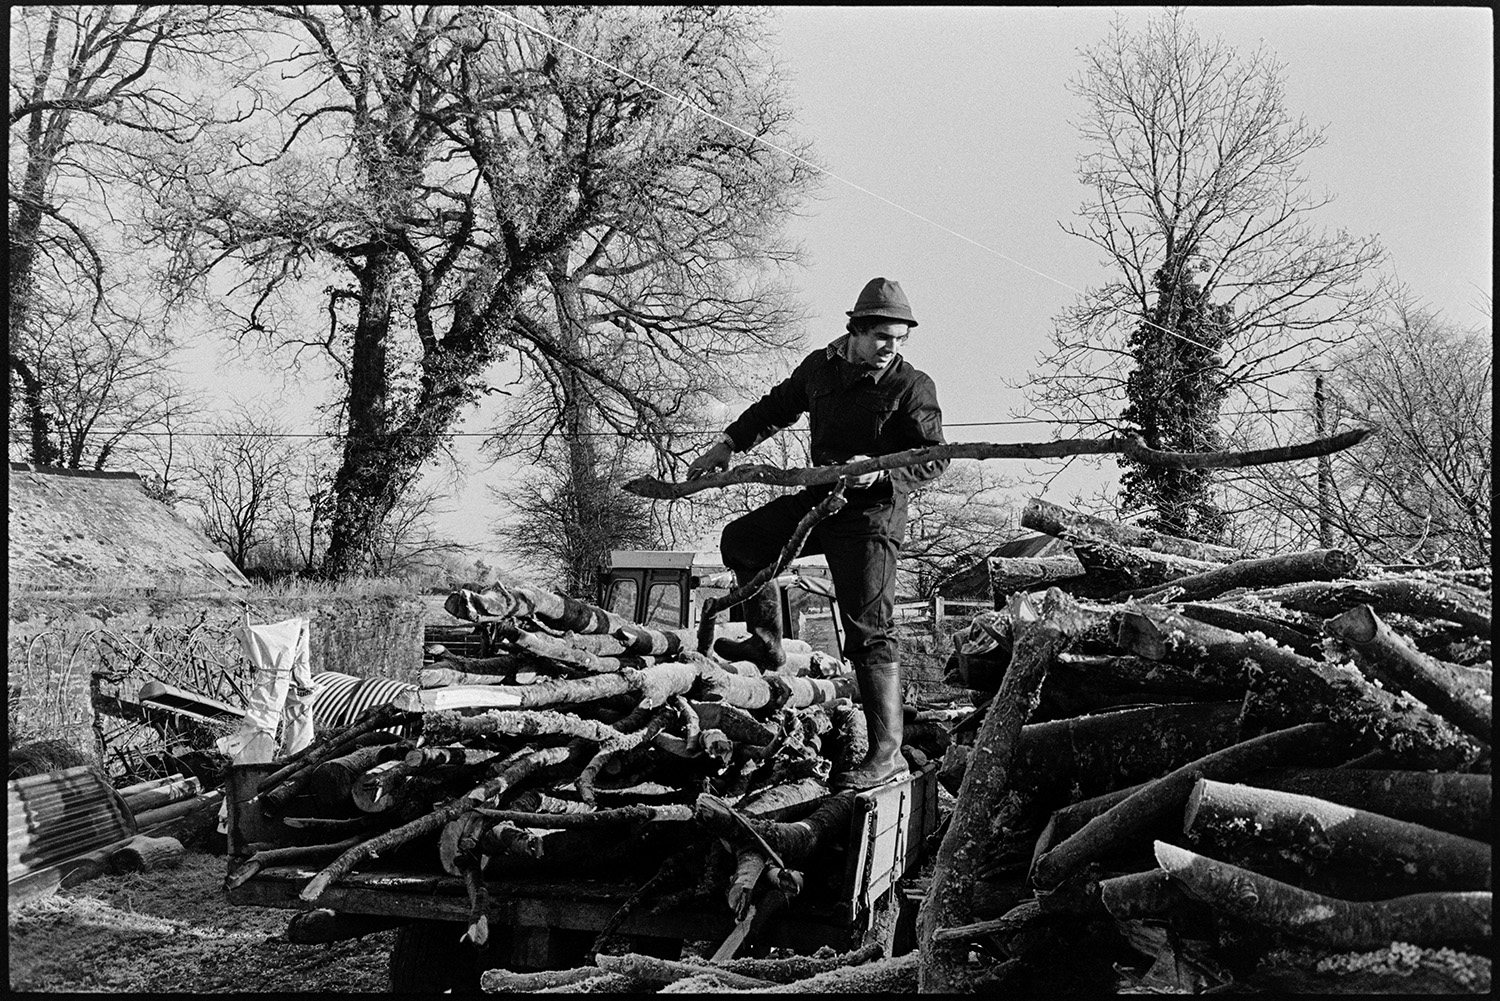 Farmer sorting logs in farmyard. 
[Stephen Squire sorting a logs from a woodpile in the farmyard at Lower Langham, Dolton. Elm trees can be seen in the background.]